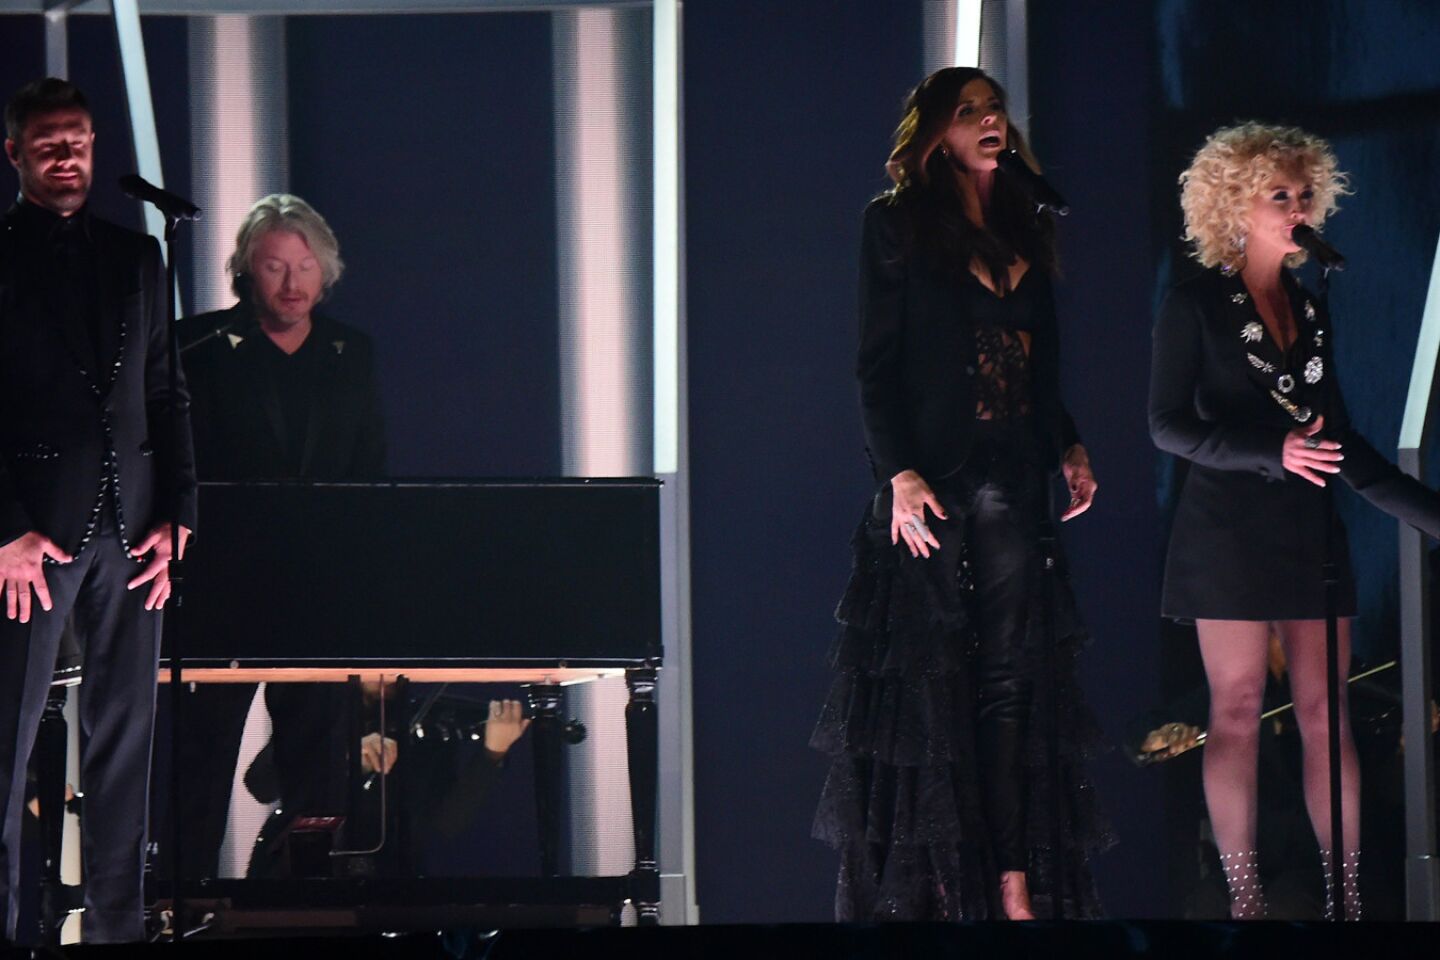 Little Big Town performs the song "Girl Crush."